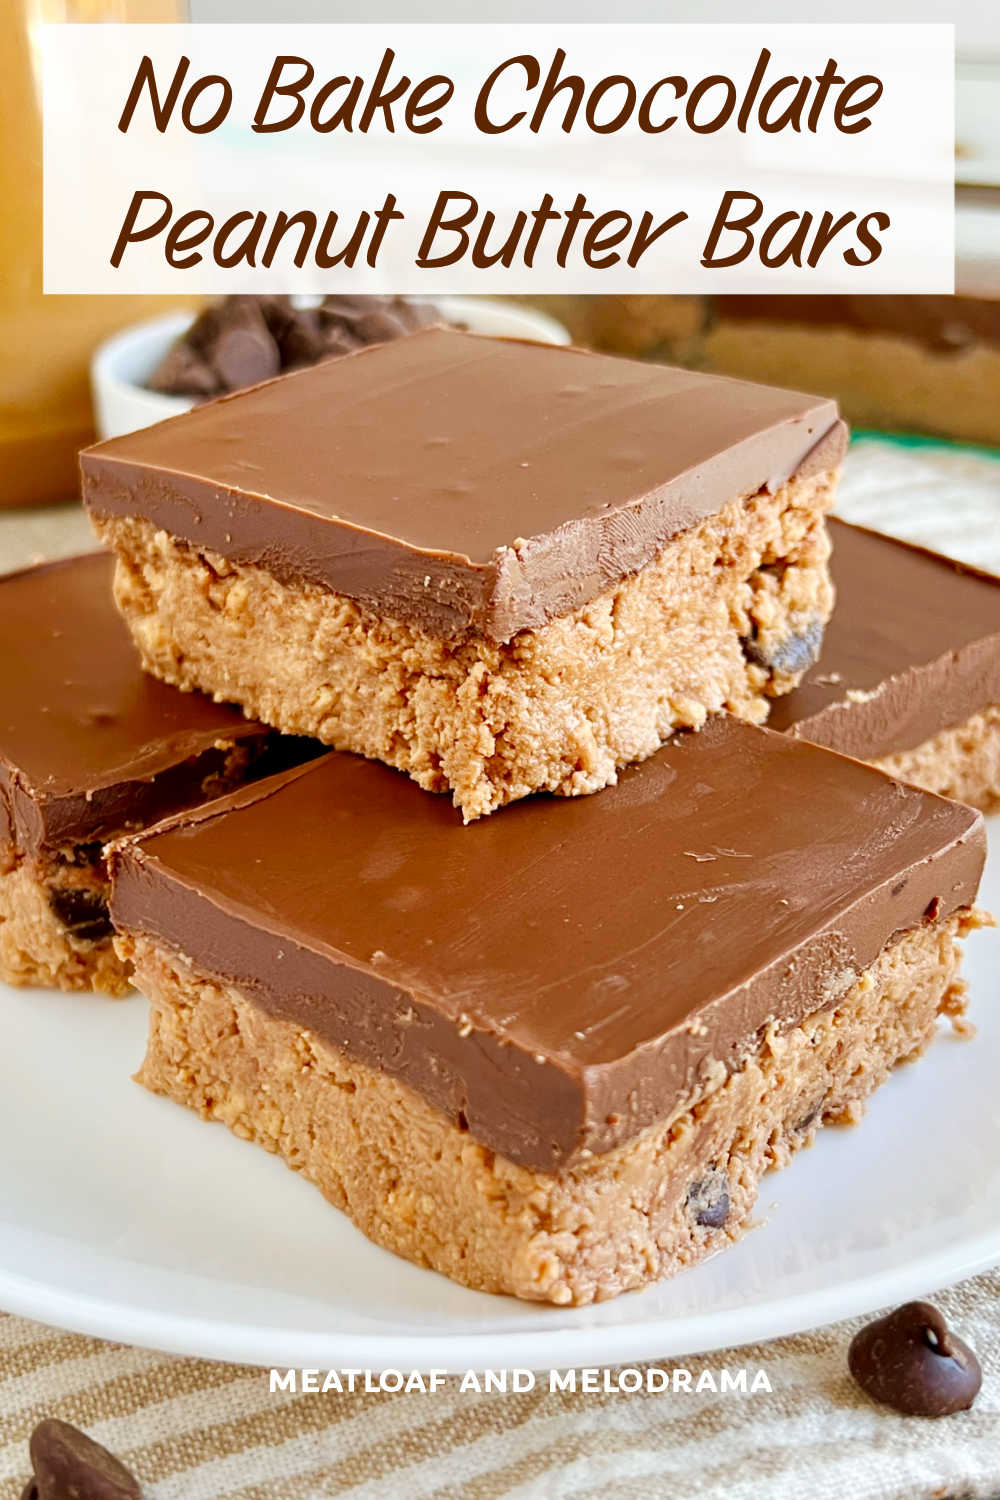 Classic No Bake Chocolate Peanut Butter Bars have a crunchy peanut butter base with smooth chocolate topping. These no-bake peanut butter bars are an  easy dessert or after school treat! via @meamel